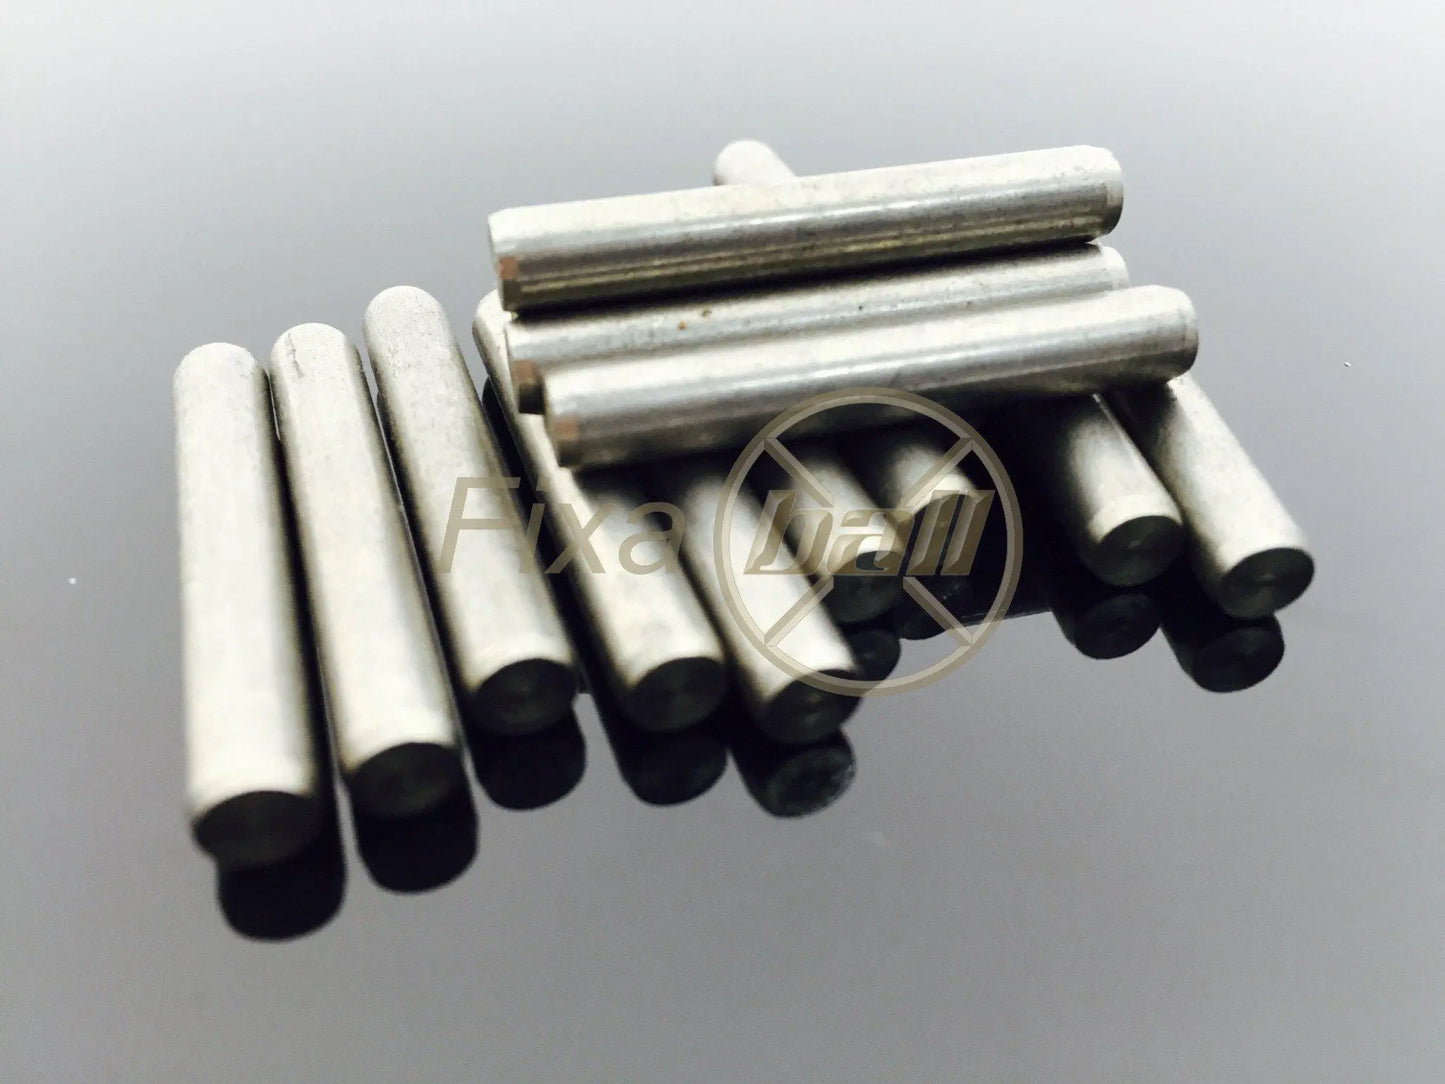 5mm Dowel Pins A1 Stainless Steel DIN 7 - Fixaball Ltd. Fixings and Fasteners UK